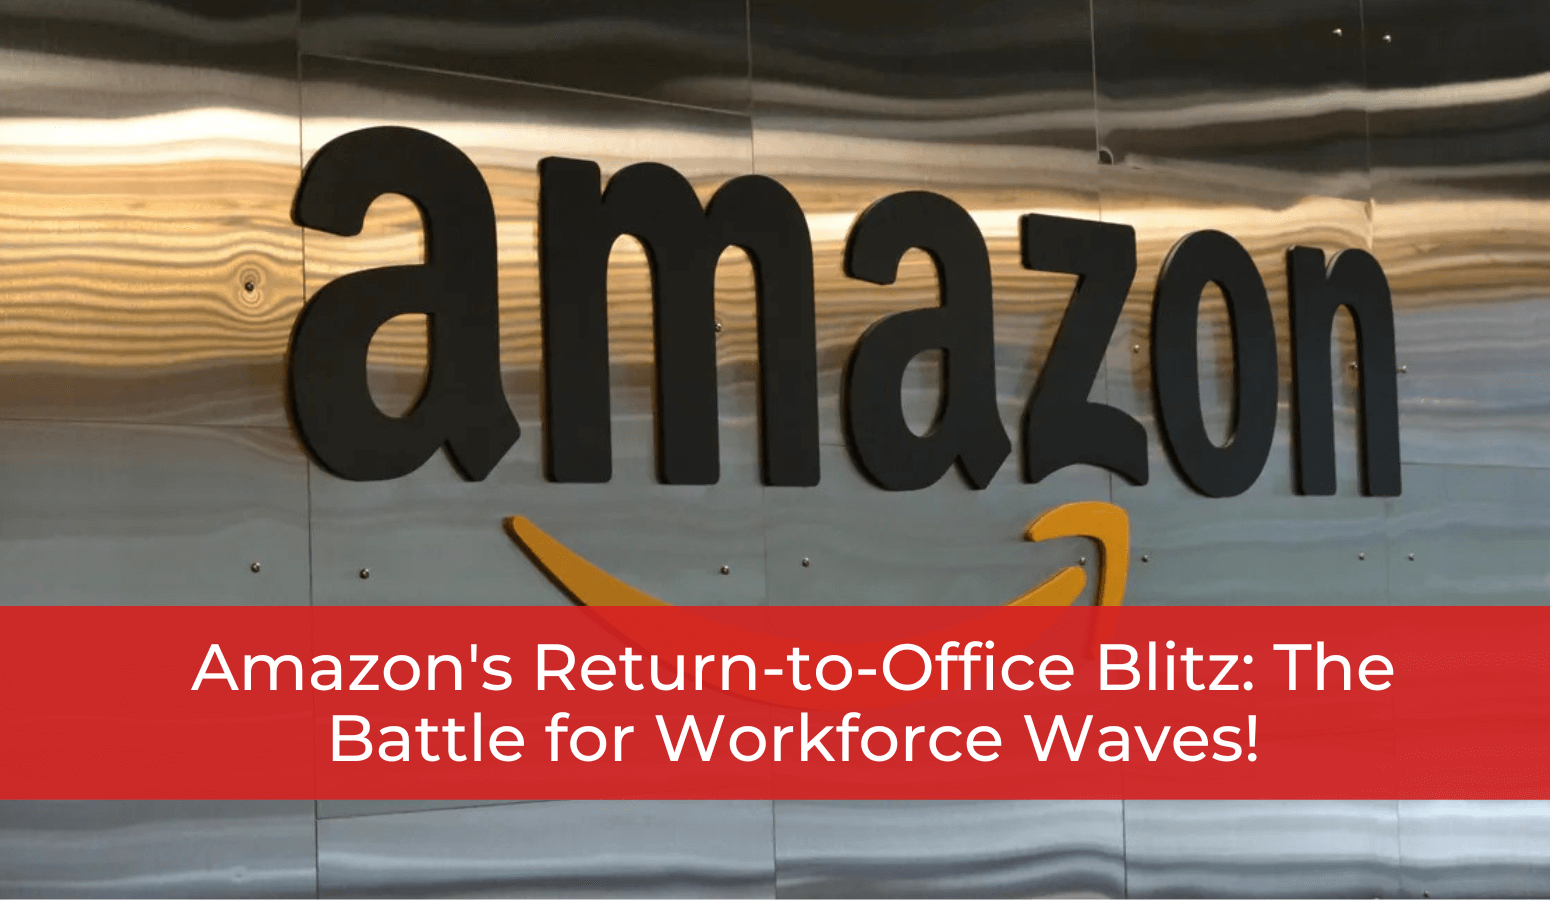 Featured image for “Amazon’s Return-to-Office Blitz: The Battle for Workforce Waves!”